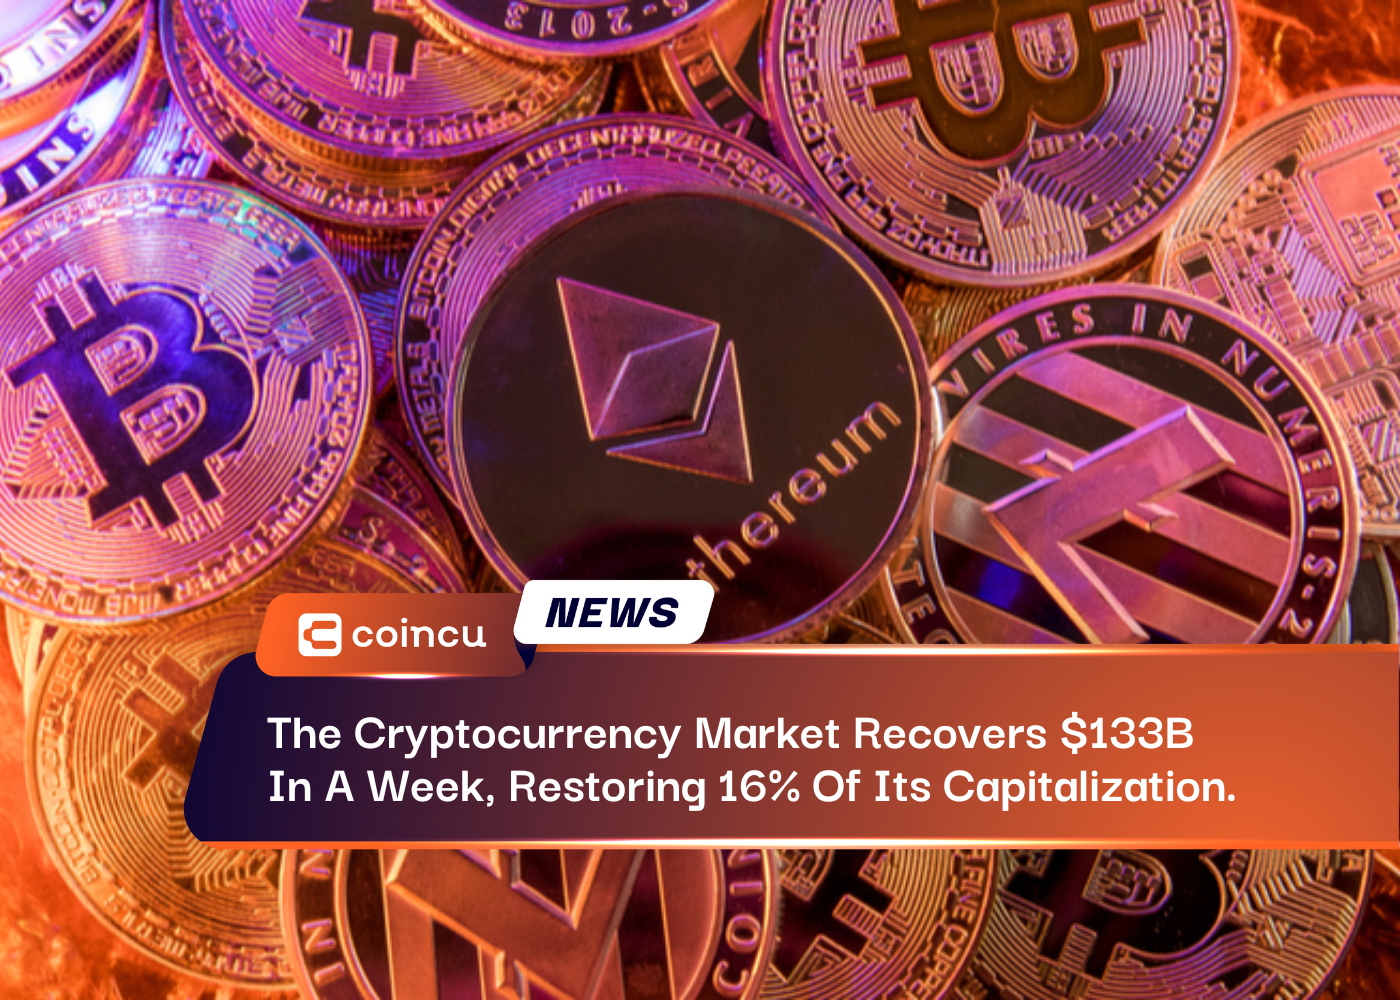 The Cryptocurrency Market Recovers $133B In A Week, Restoring 16% Of Its Capitalization.The Cryptocurrency Market Recovers $133B In A Week, Restoring 16% Of Its Capitalization.